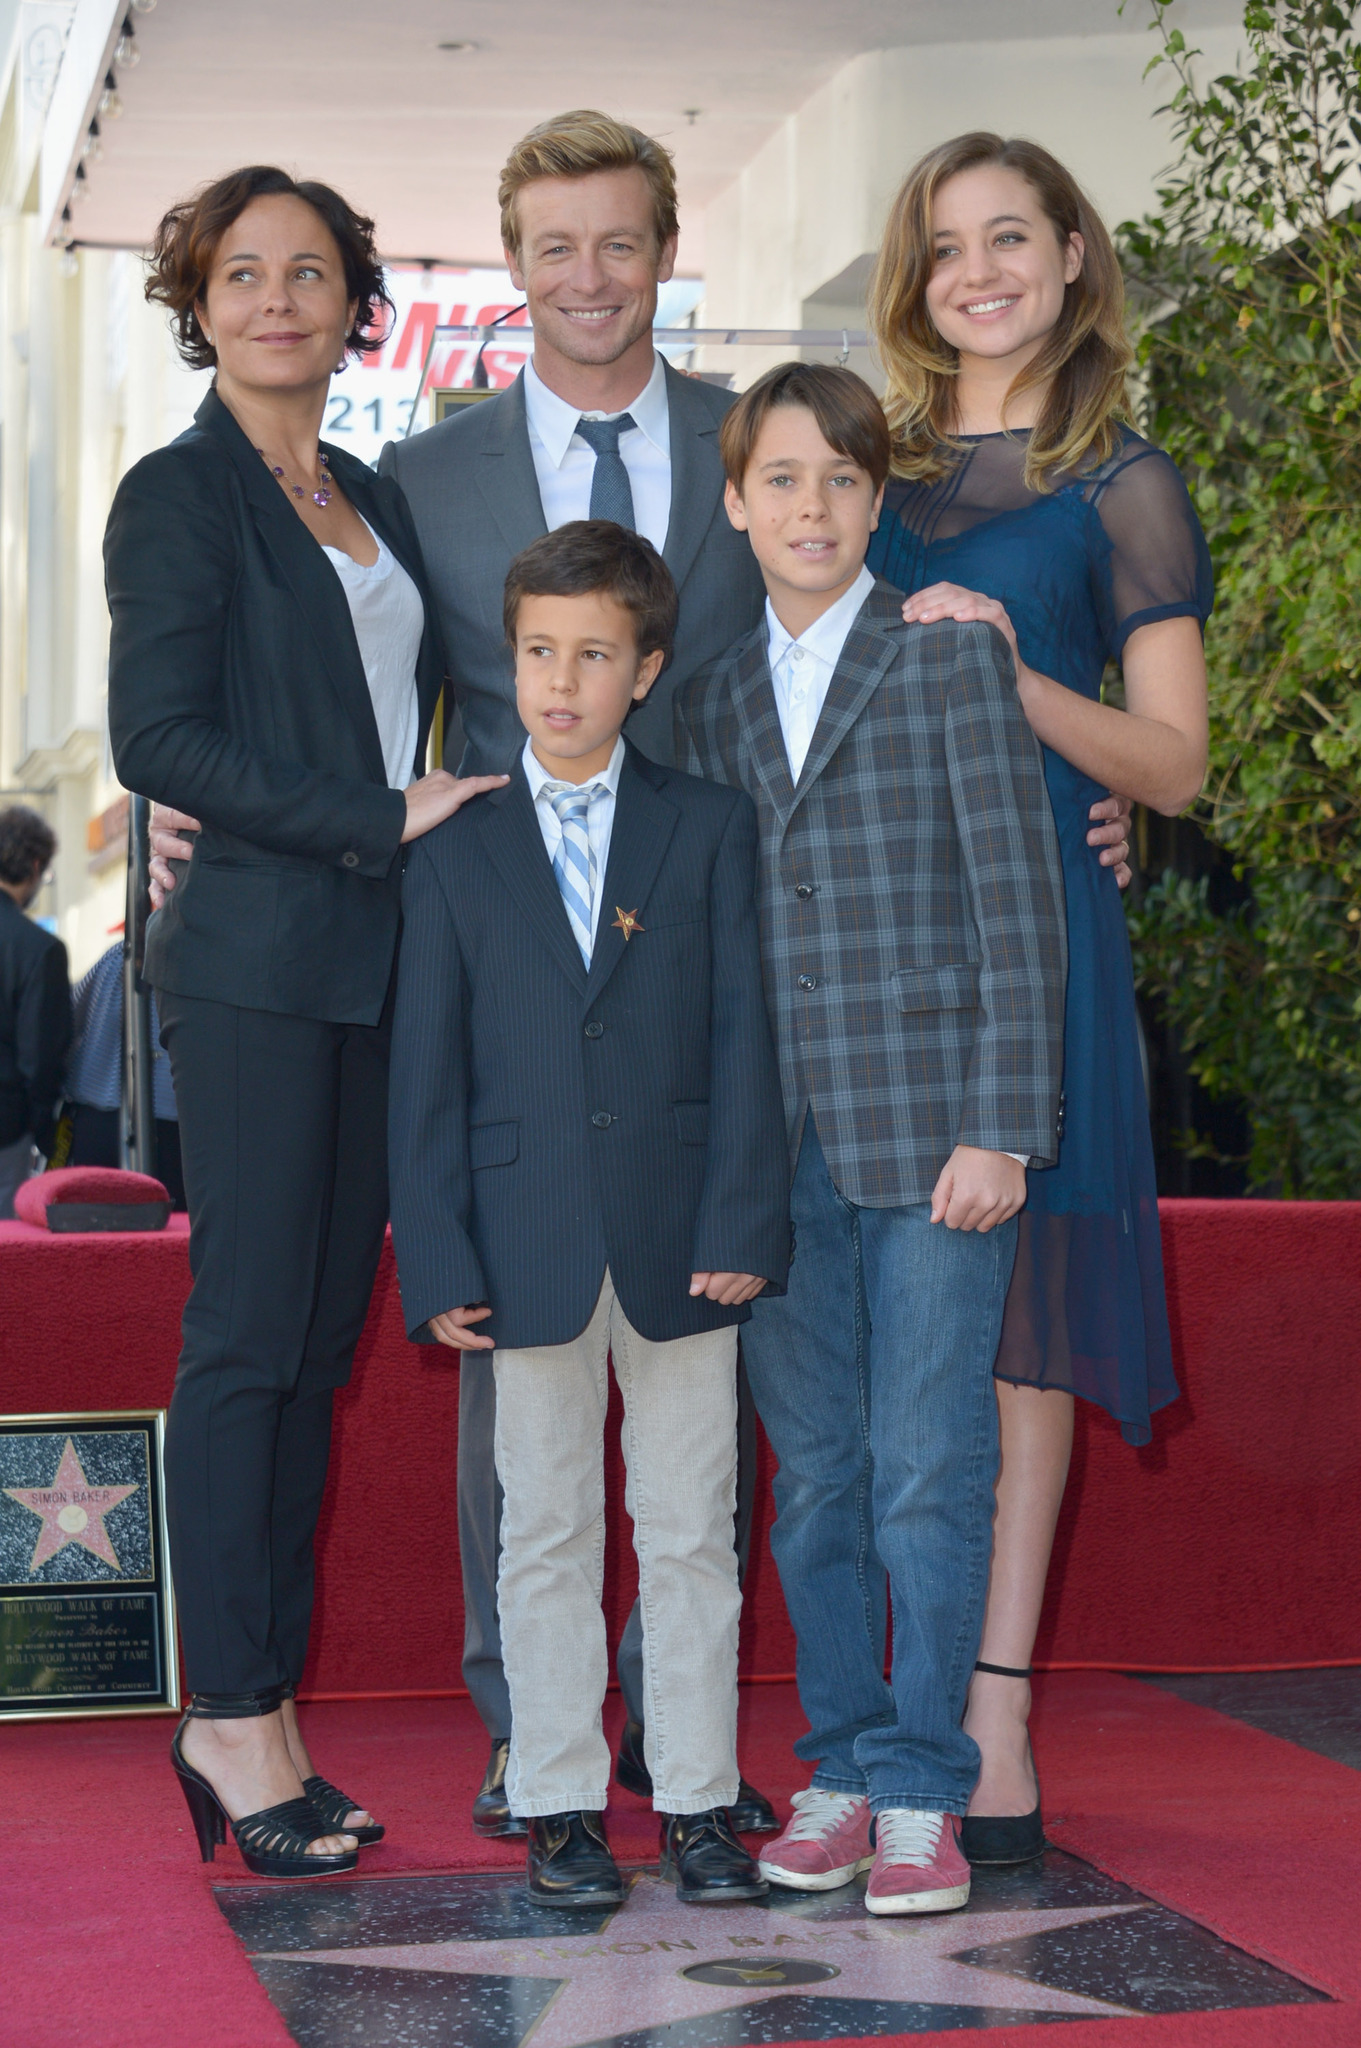 Rebecca Rigg, actor Simon Baker, Stella Baker, Harry Baker and Claude Baker attend a ceremony honoring Simon Baker with the 2,490th Star on The Hollywood Walk of Fame on February 14, 2013 in Hollywood, California.